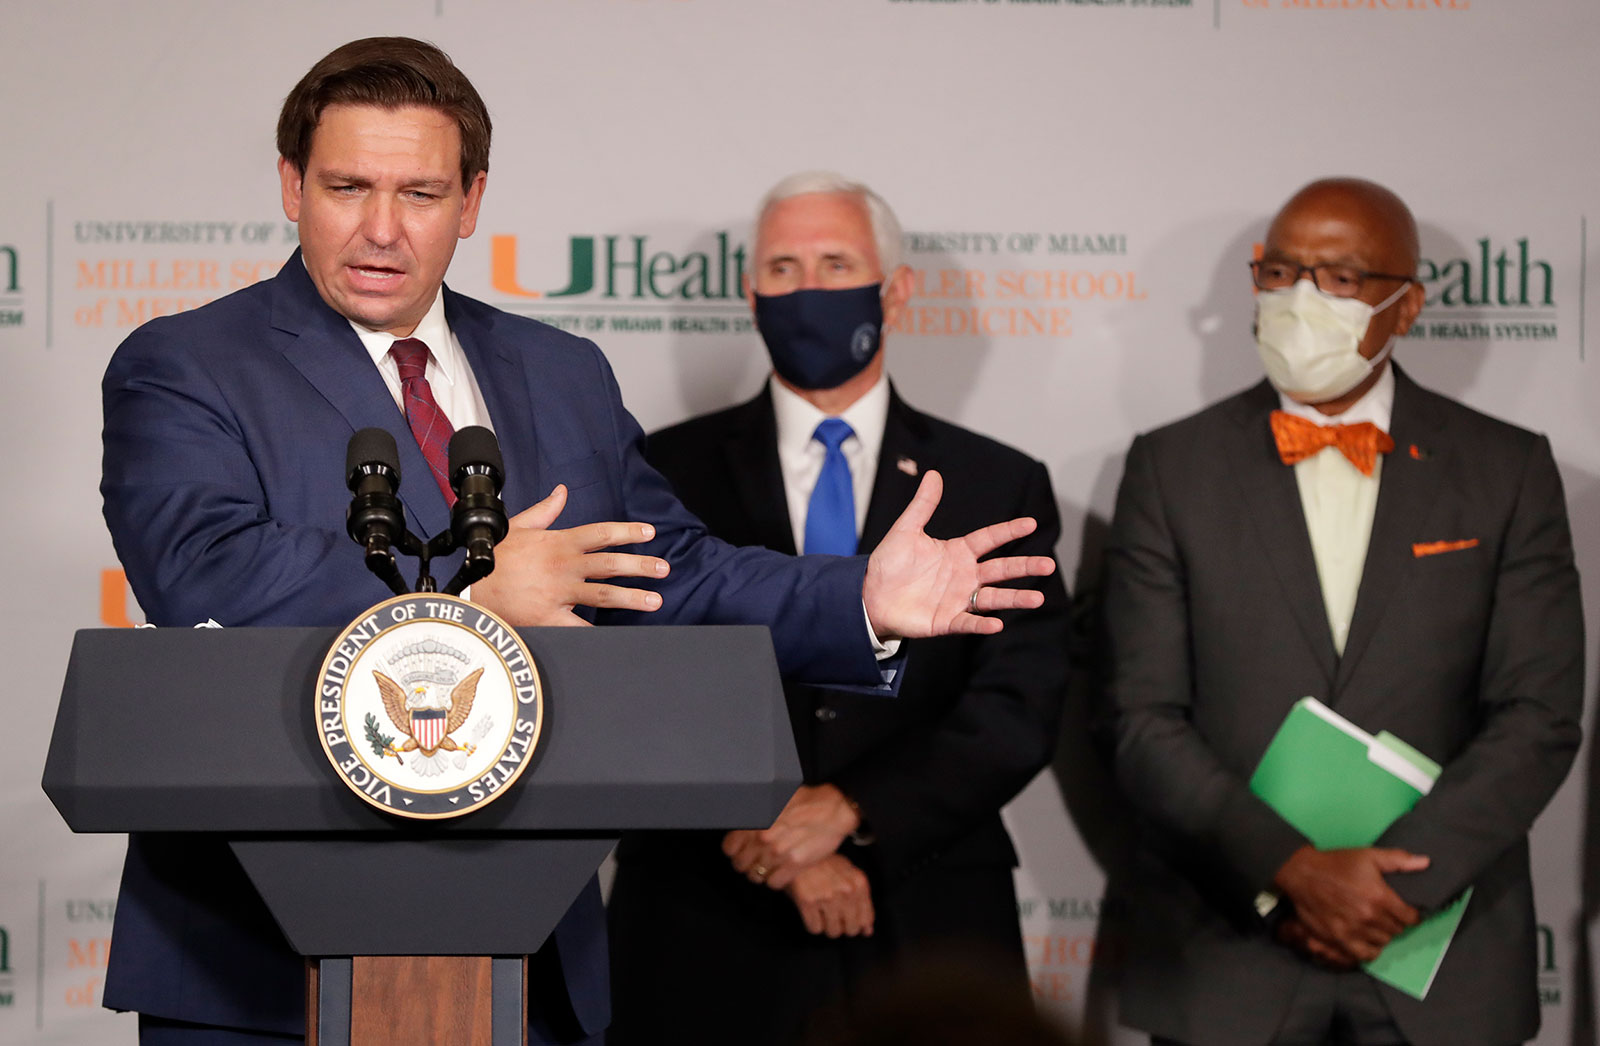 Florida Gov. Ron DeSantis speaks during a news conference at the University of Miami Miller School of Medicine on Monday, July 27.